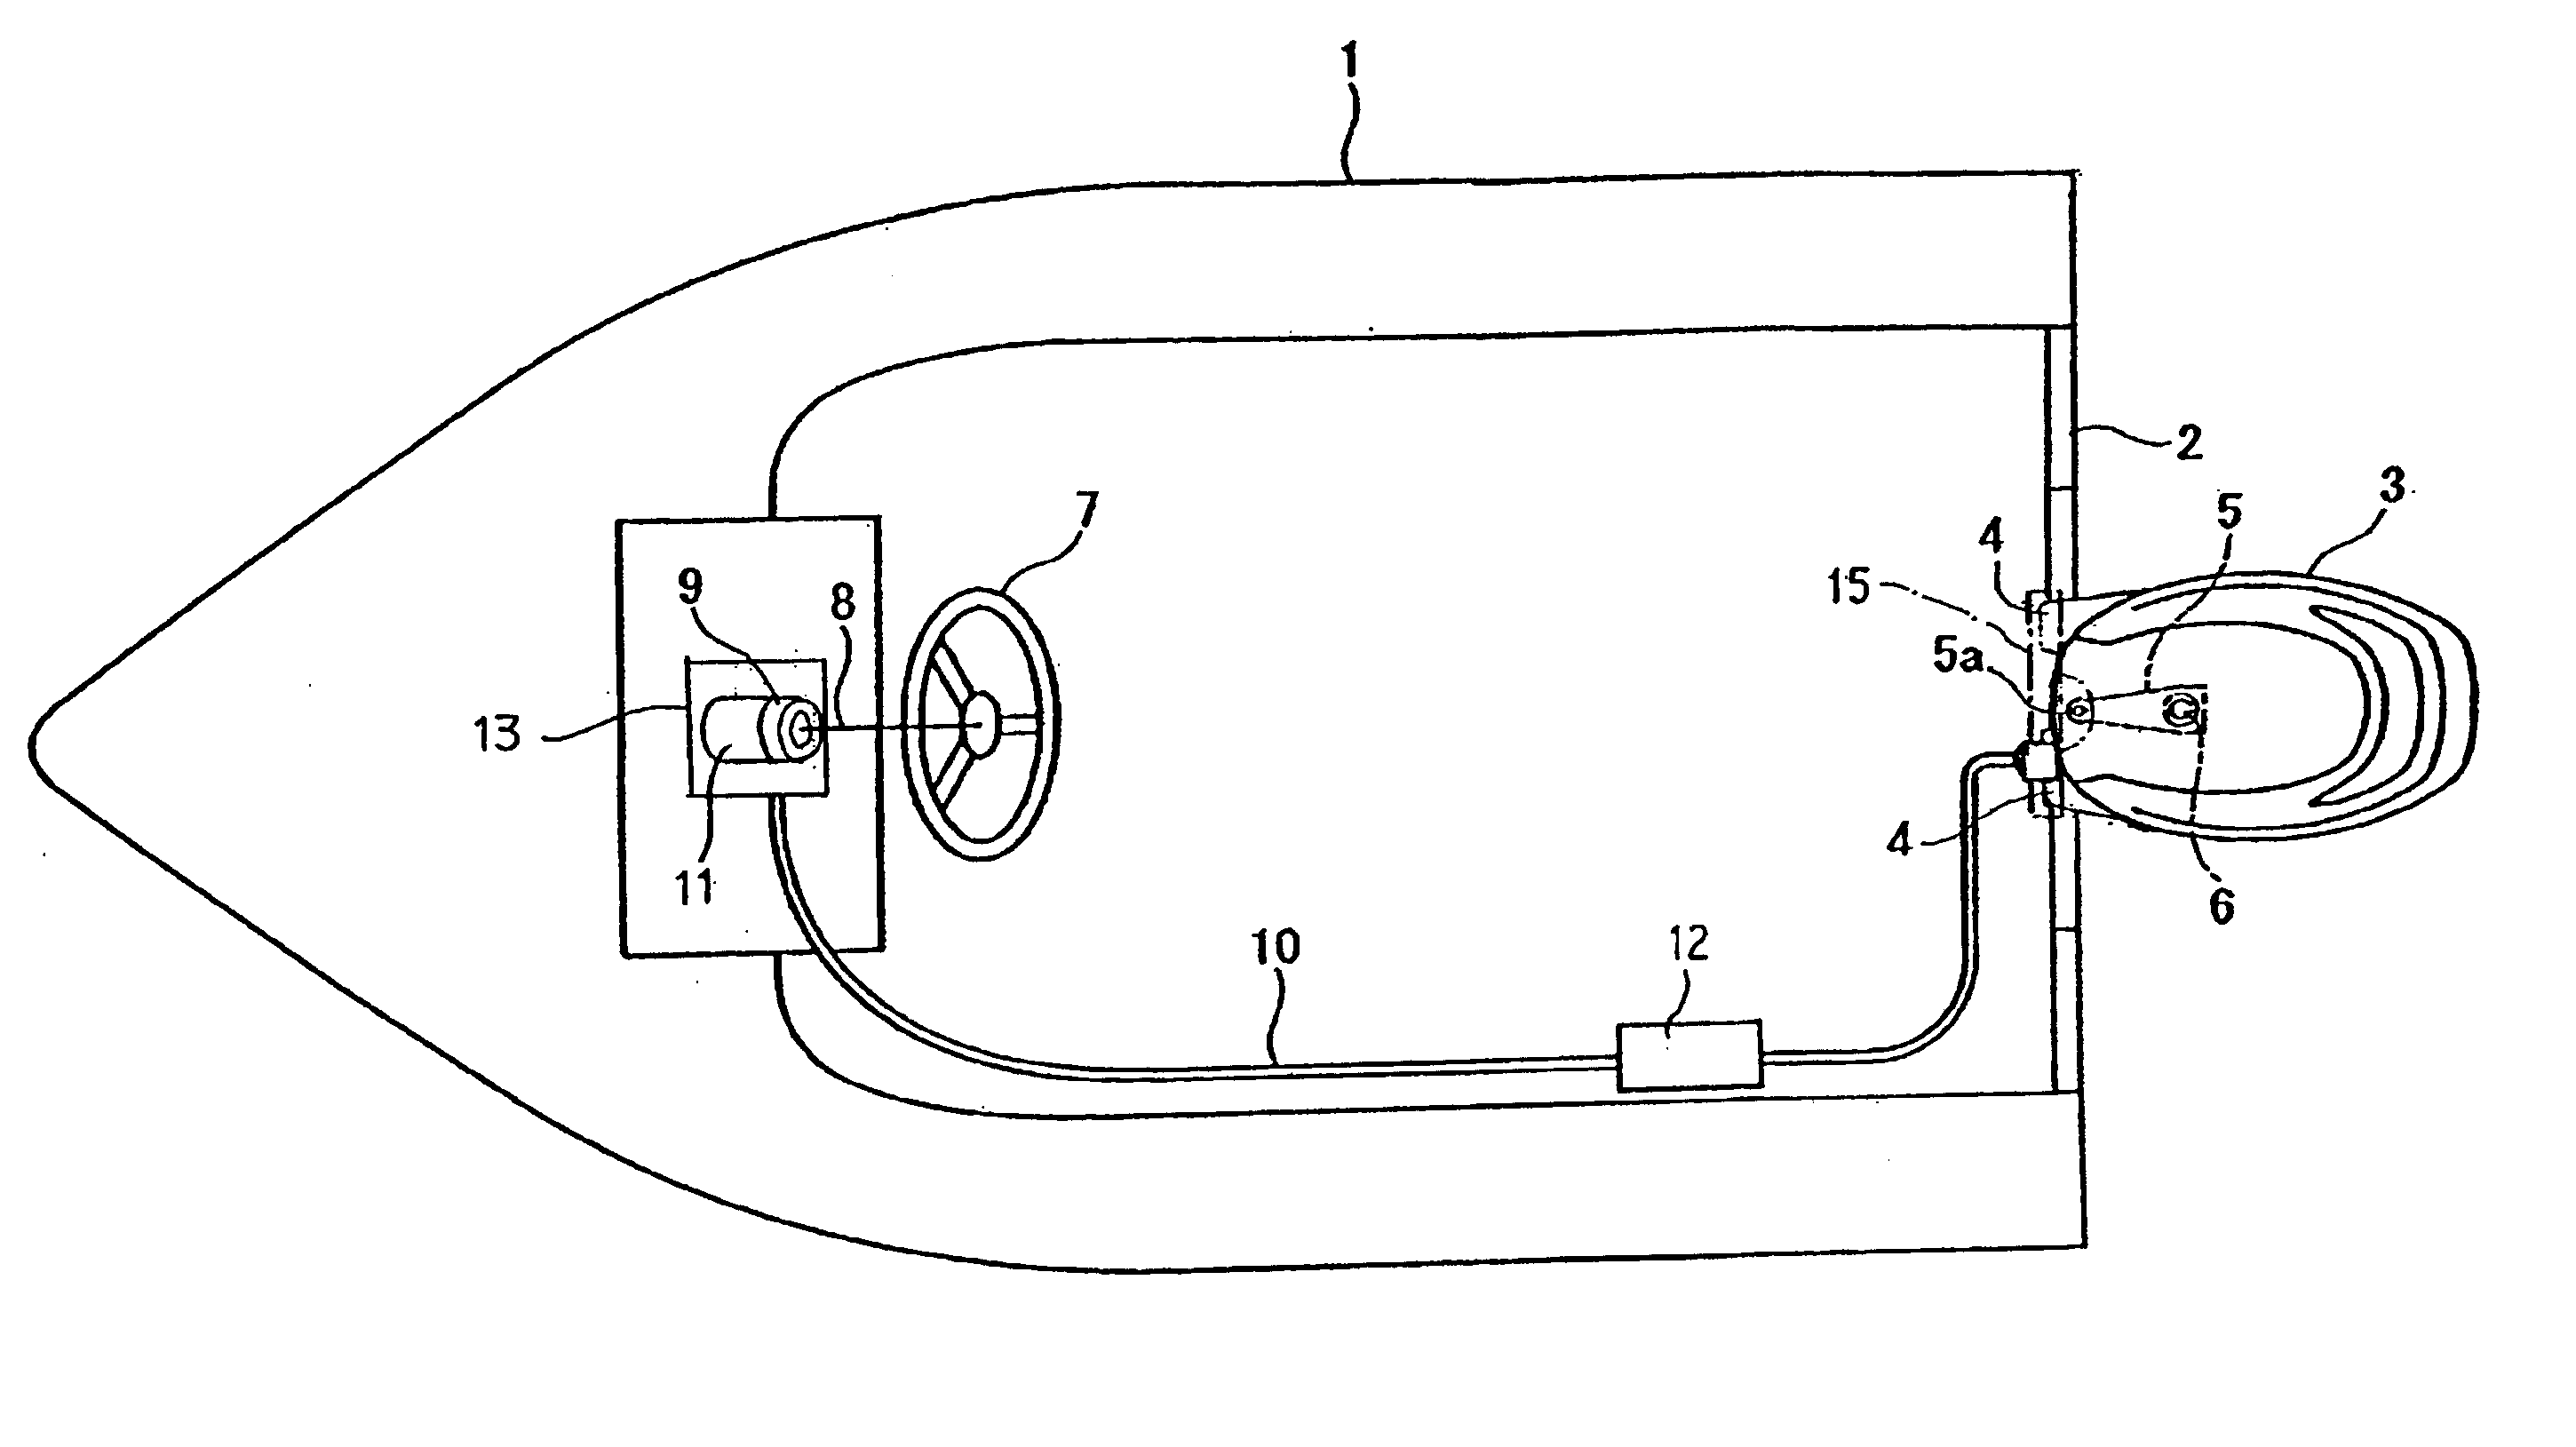 Steering system for boat